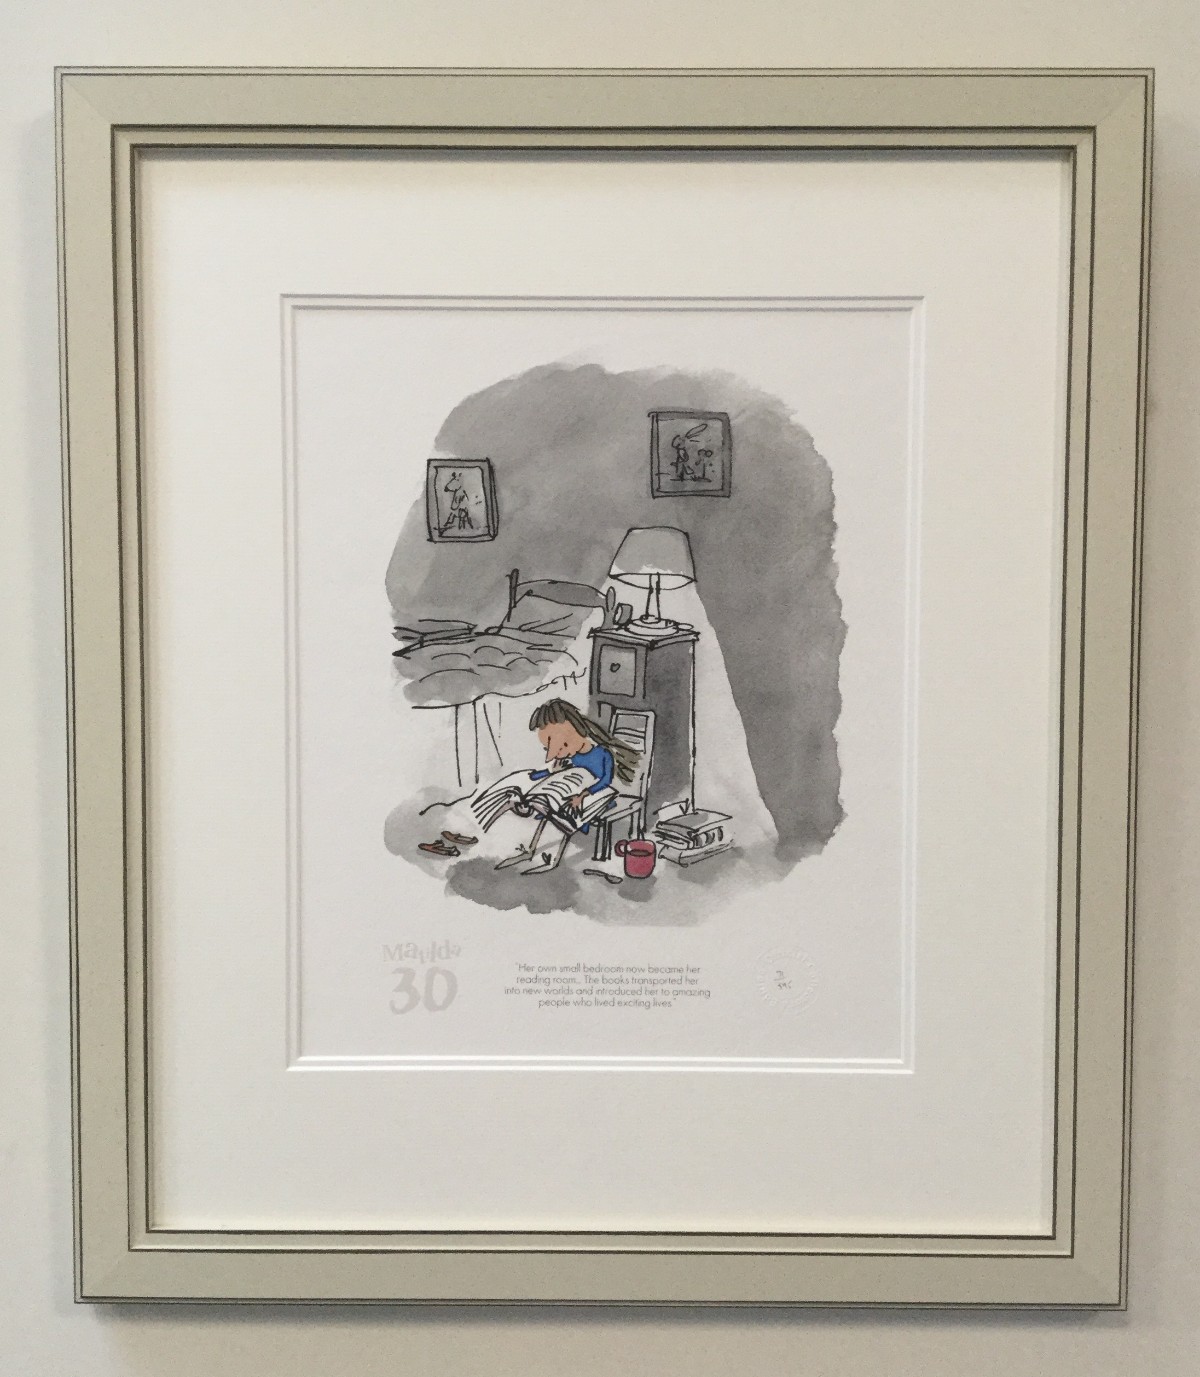 Matilda 30th - Her Own Small Bedroom by Quentin Blake